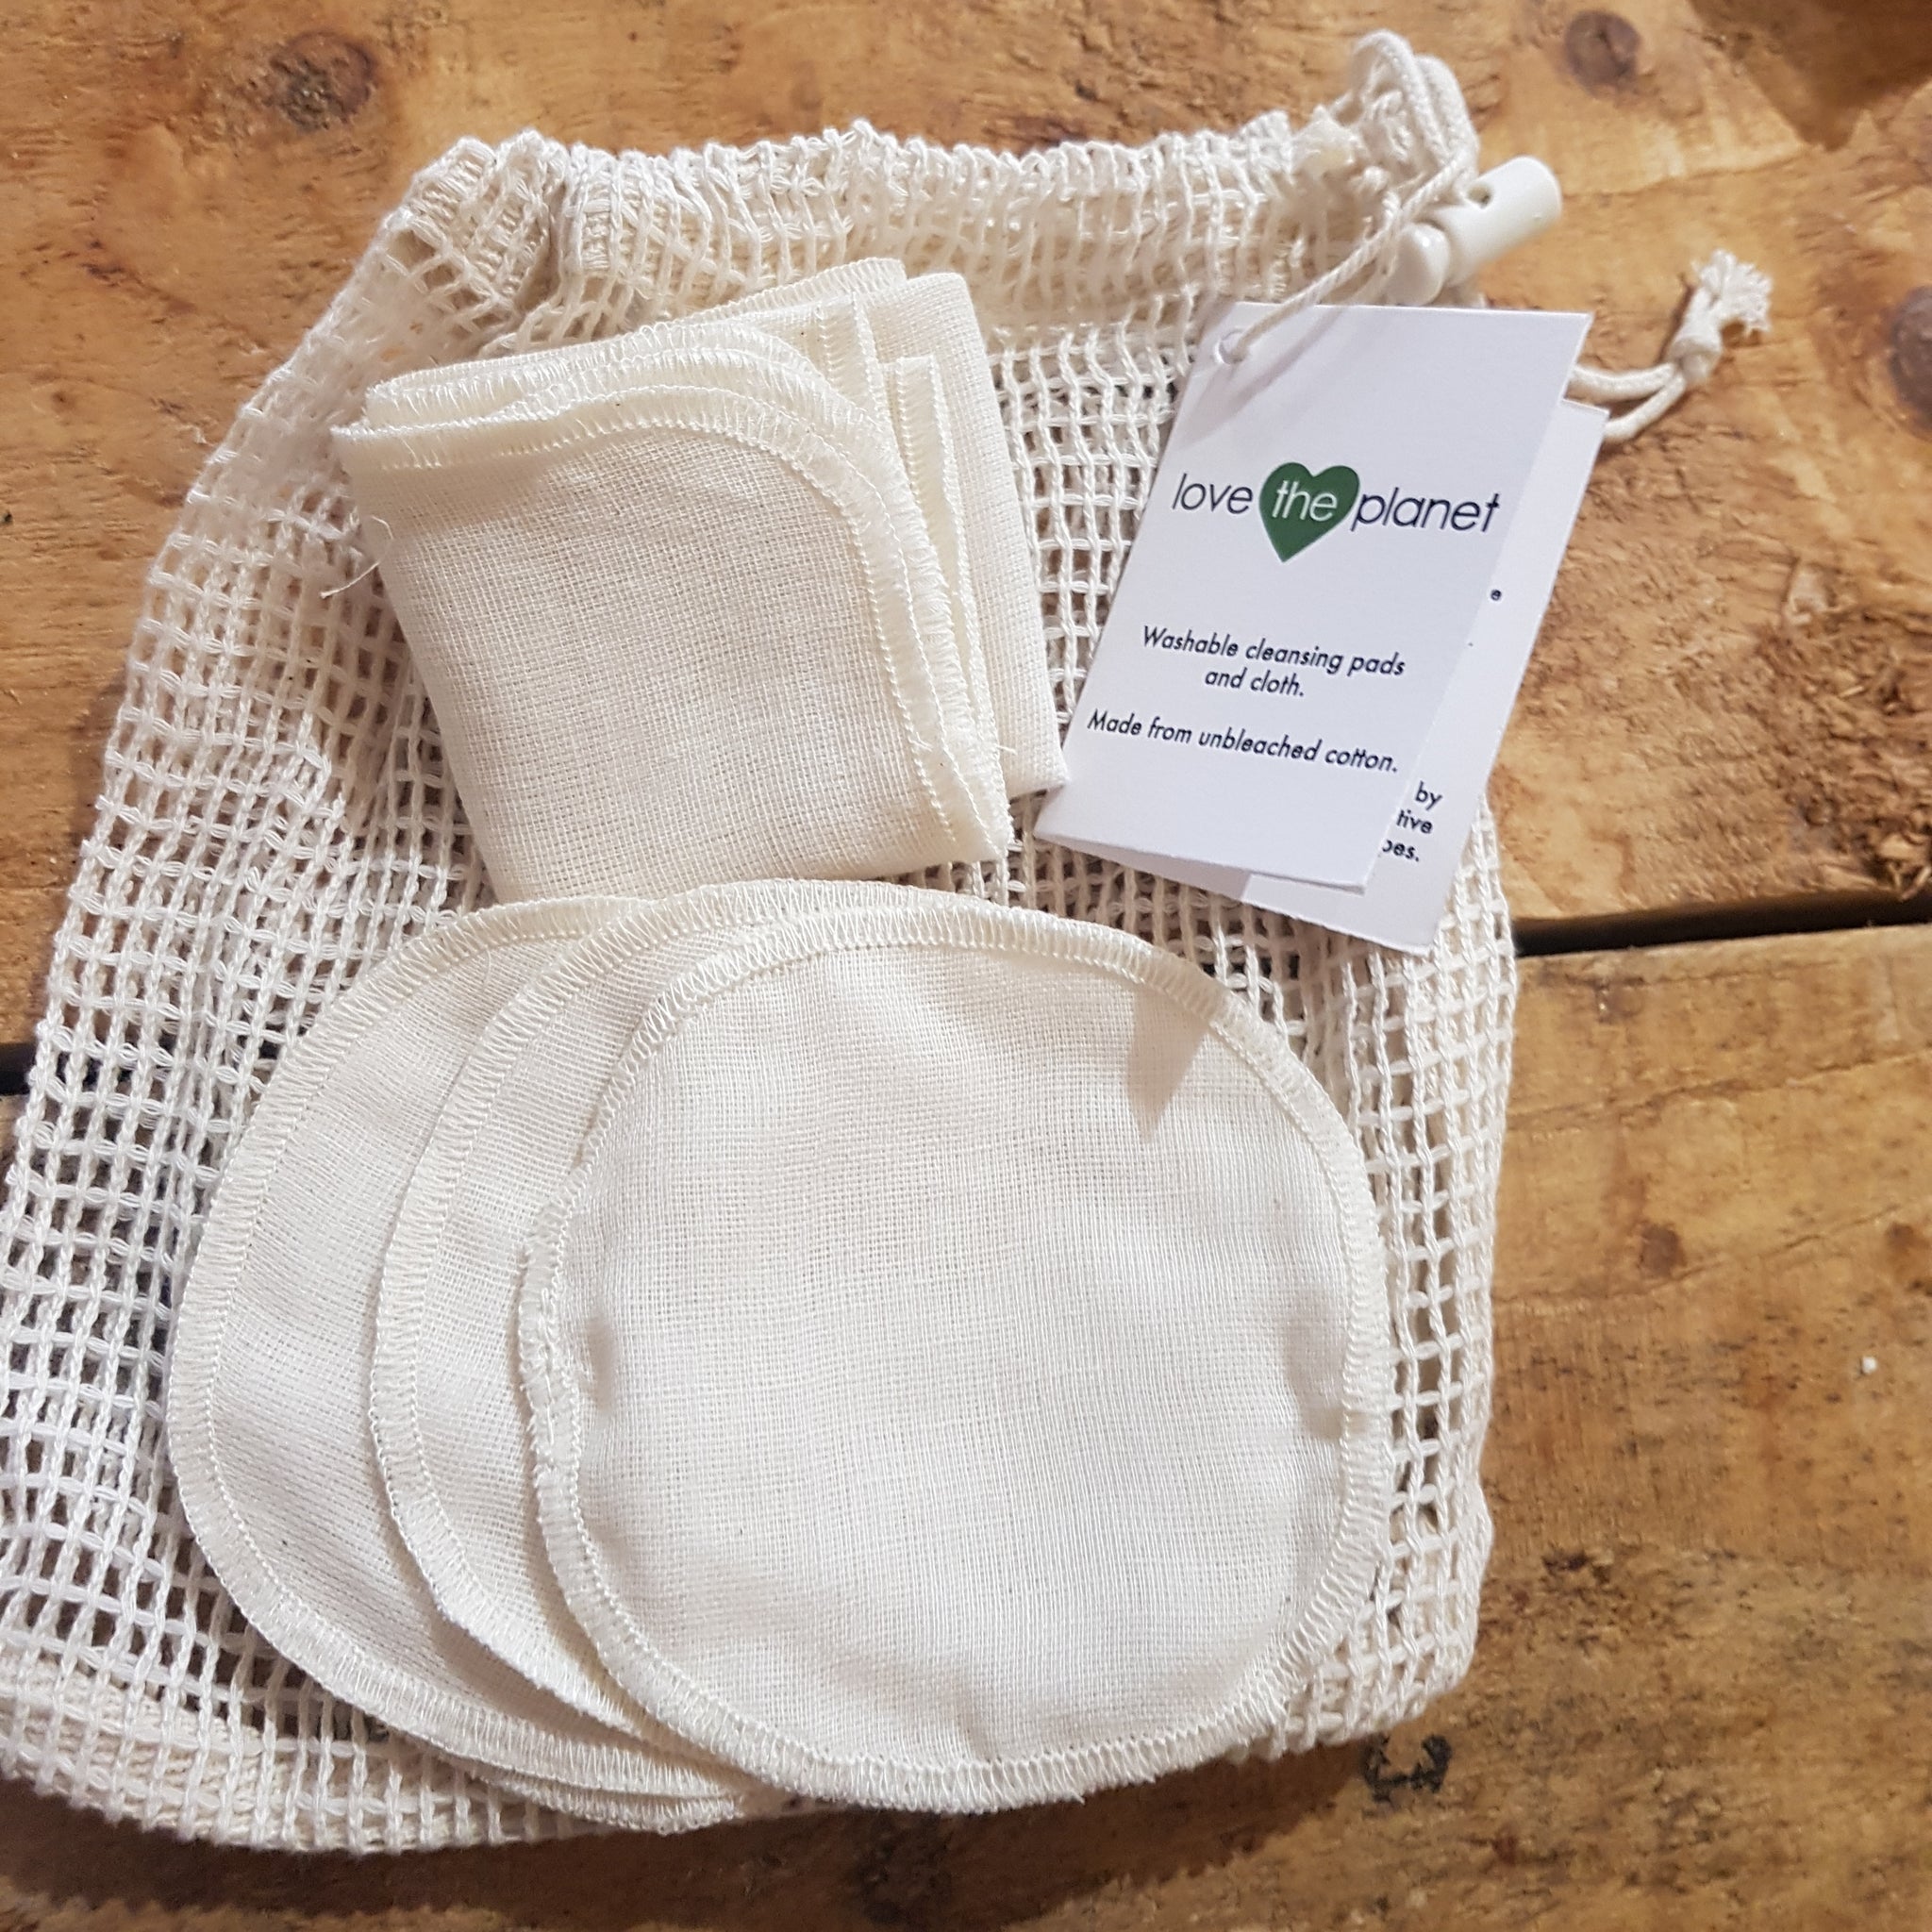 Love the planet cleansing pads and cloth